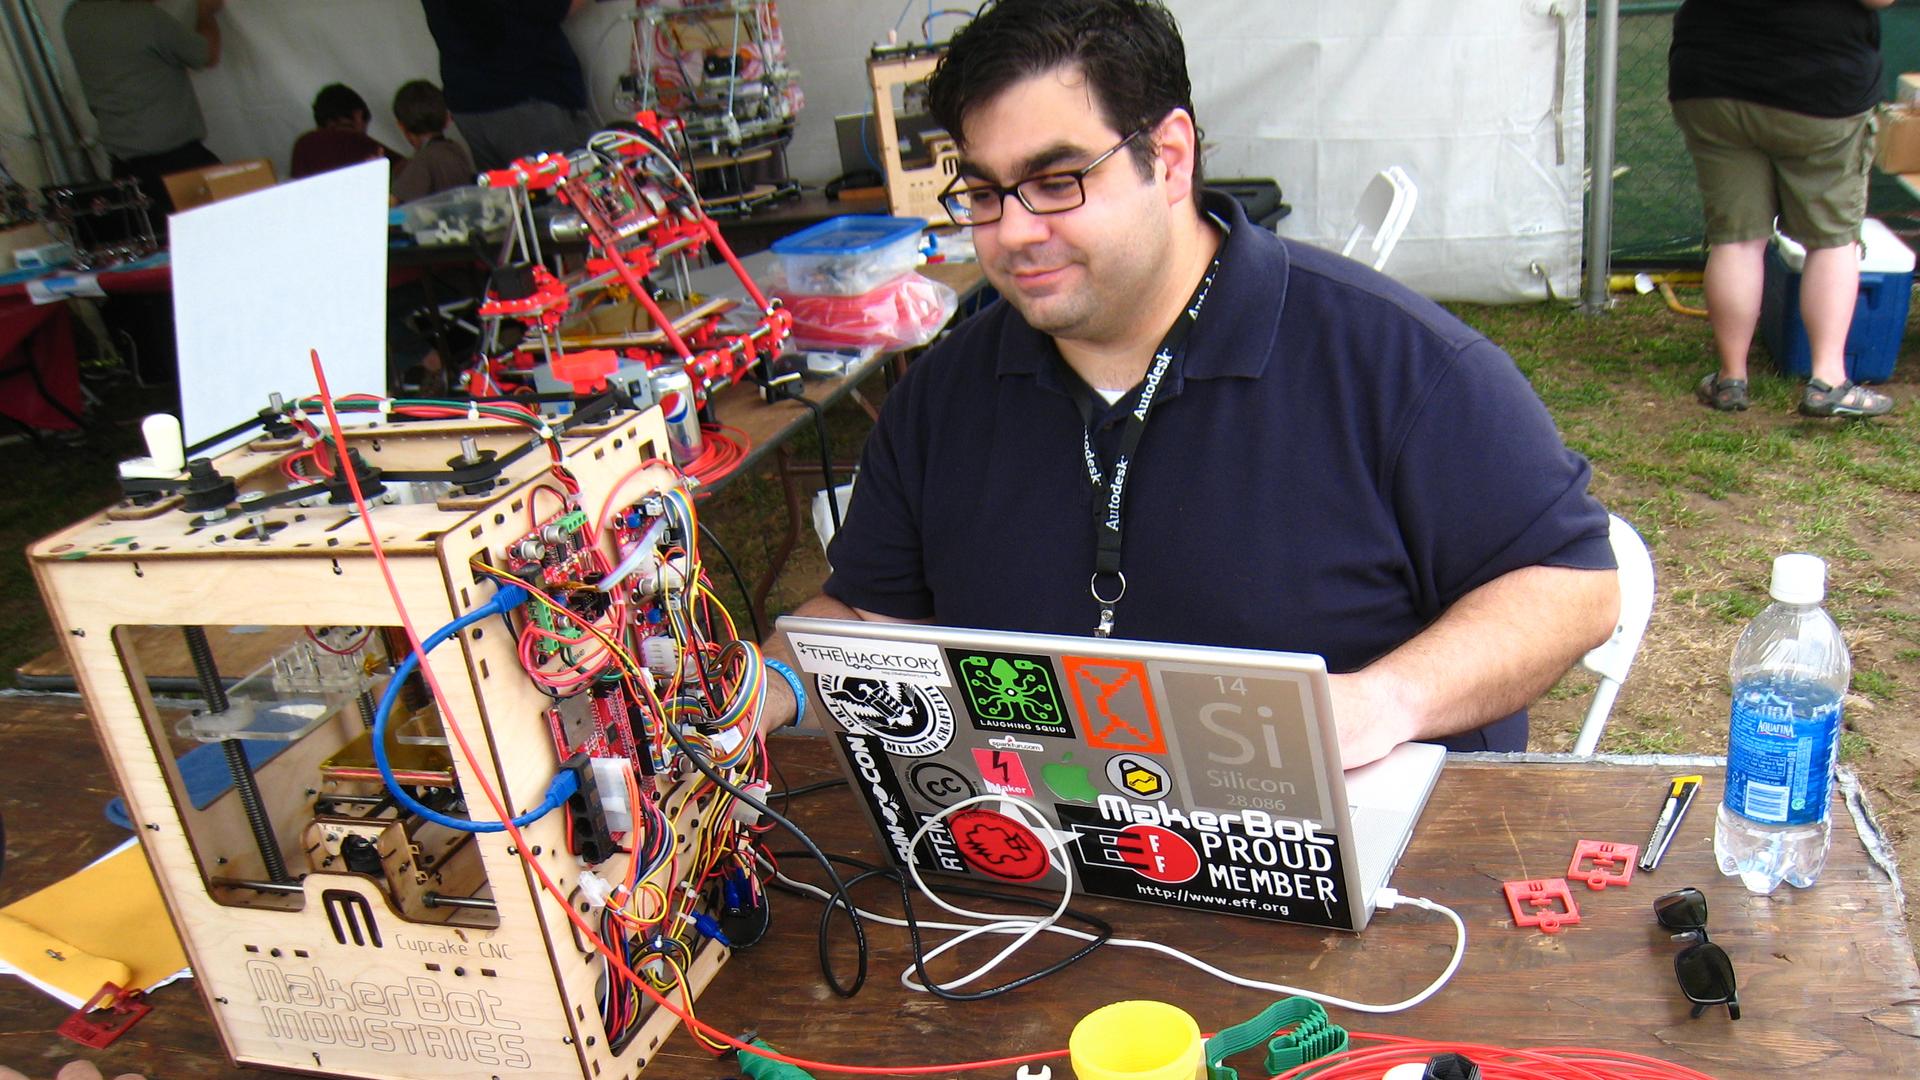 A man operates a 3D printer at a 2010 Maker Faire, a gathering for maker movement enthusiasts, in New York City.